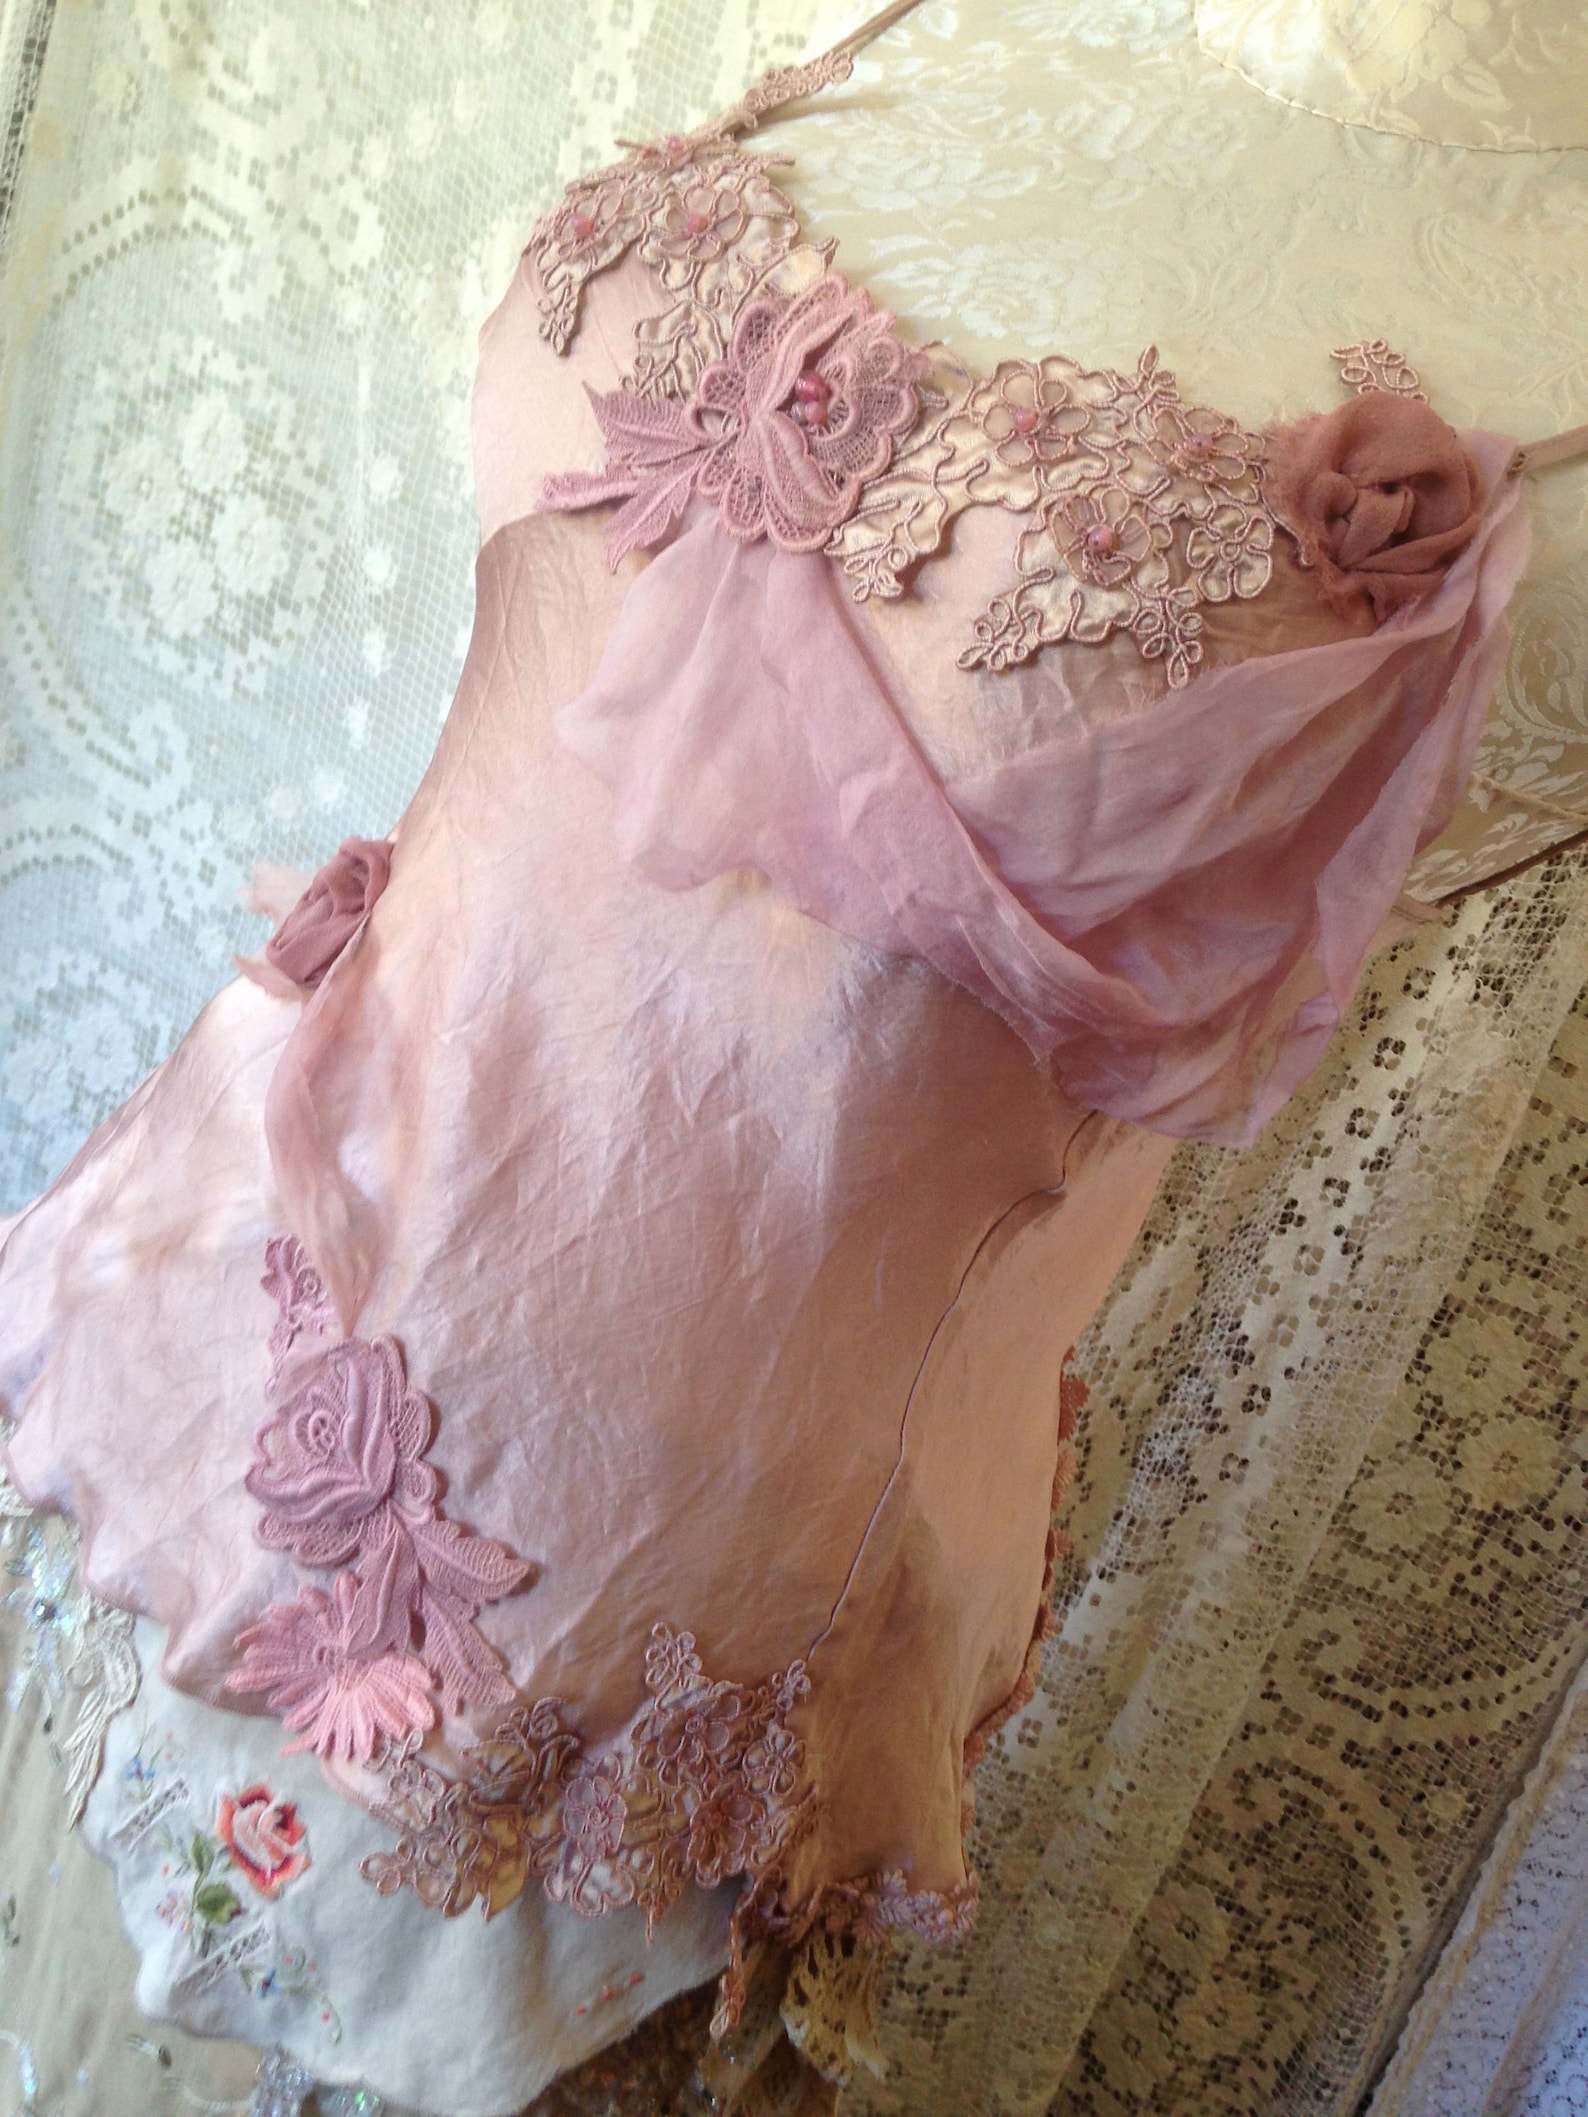 ballet pink tie-back shoestring top.fairy lagenlook shabby romantic delicate with silk flower details and lots of guipure lace t